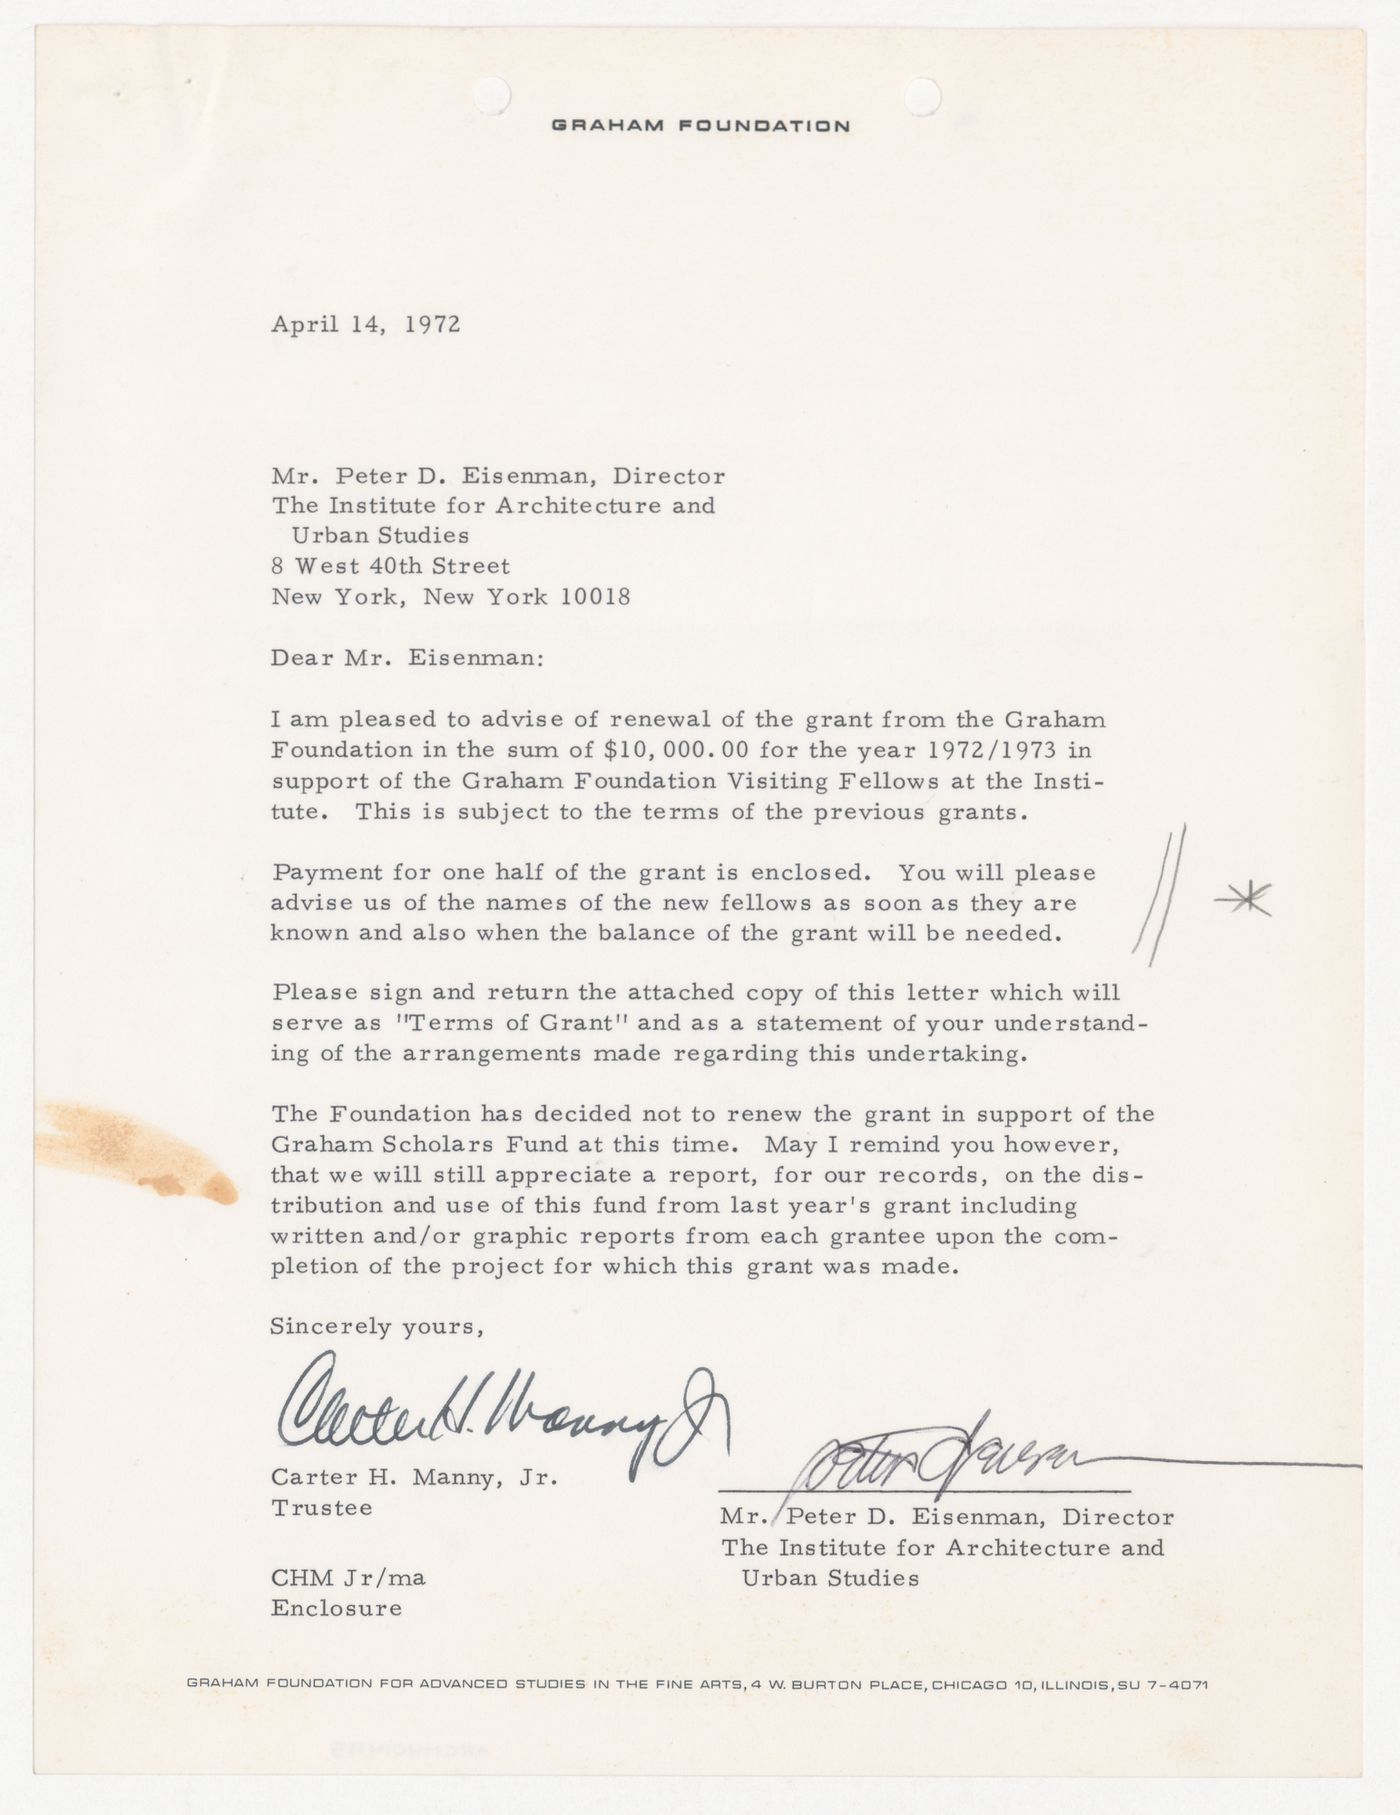 Letter from Carter H. Manny Jr. to Peter D. Eisenman about renewal of a grant from the Graham Foundation